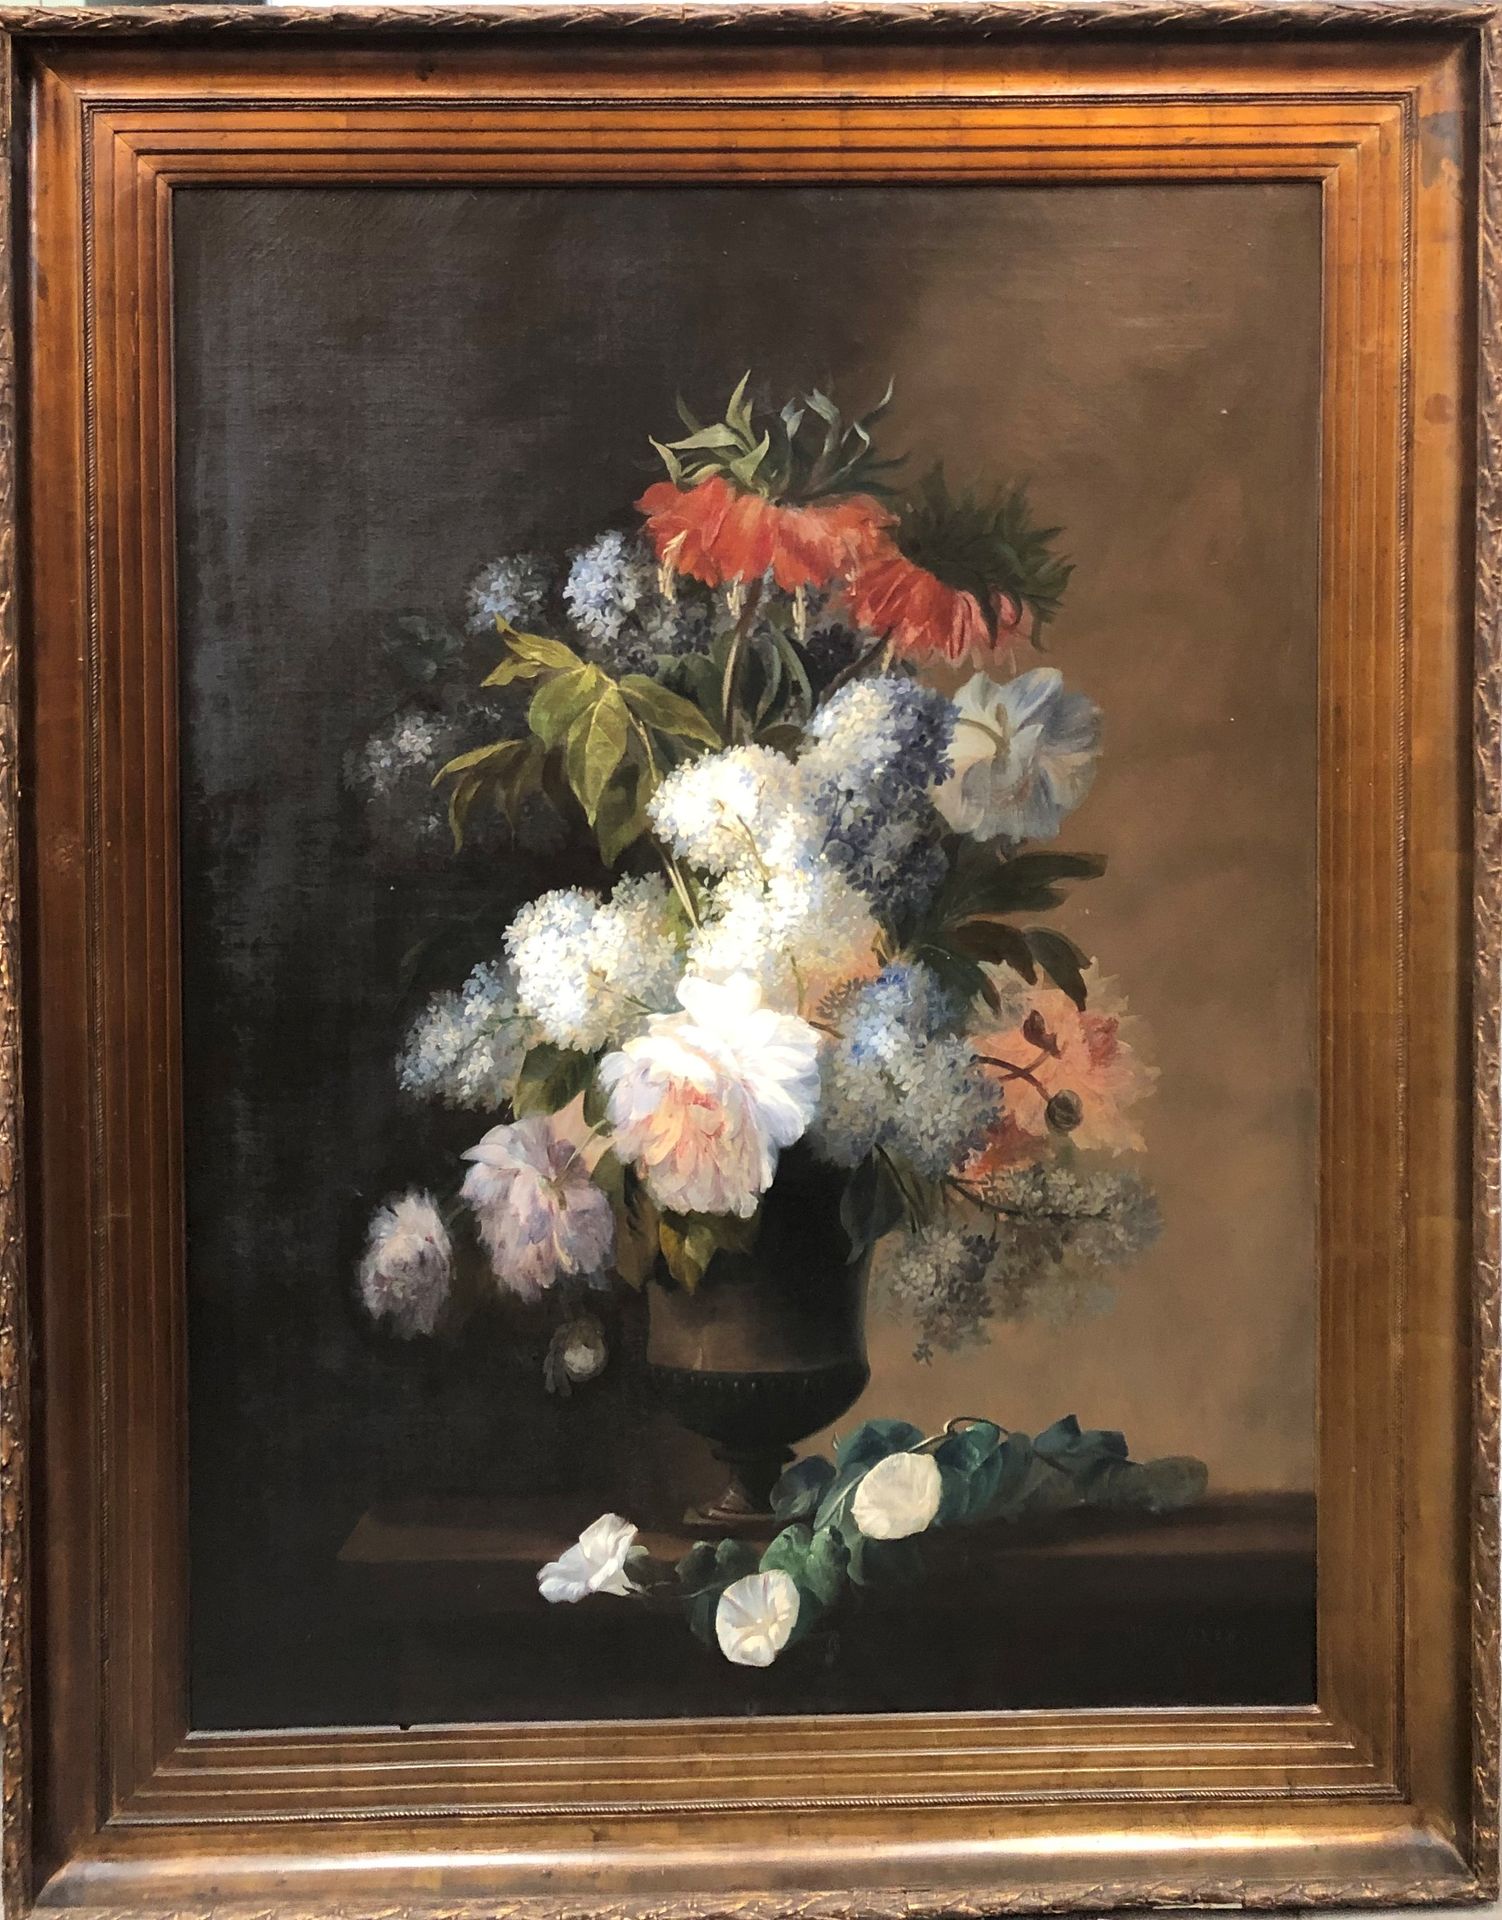 Null François Claudius COMPTE-CALIX (1813-1880)

Bunch of flowers

Two oil on ca&hellip;